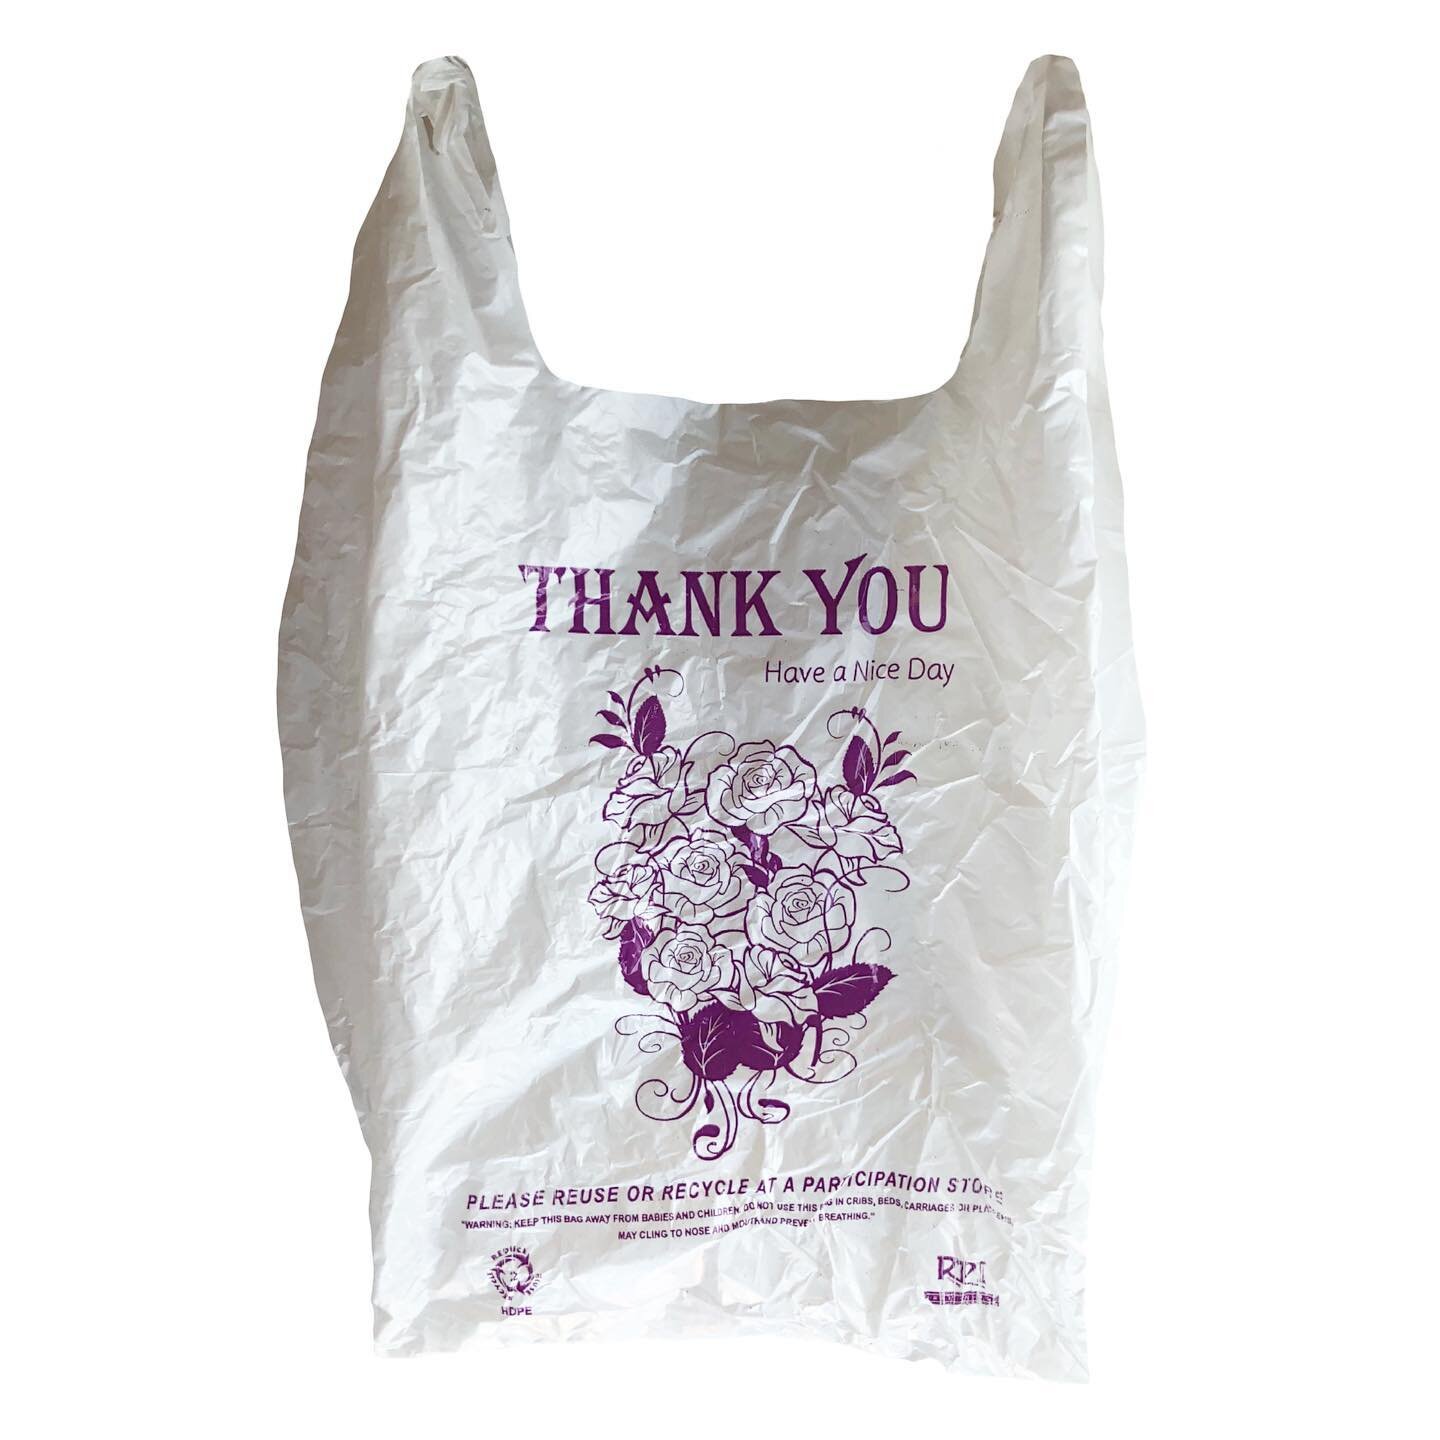 The bag with a new purple bouquet